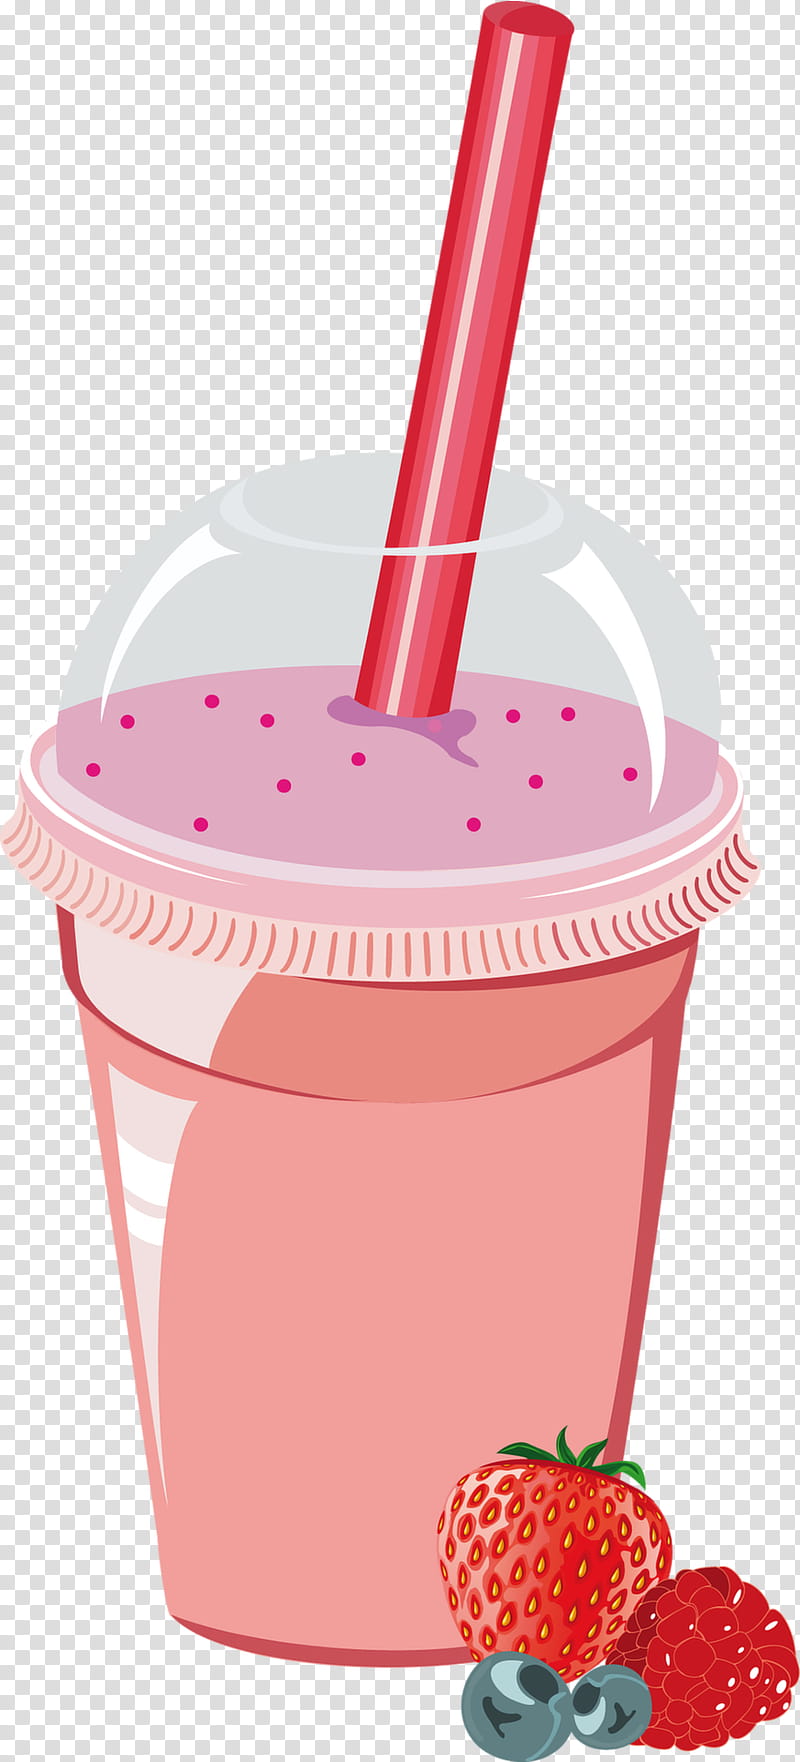 Milk Tea, Strawberry, Juice, Drink, Cup, Sugar, Snack, National Primary School transparent background PNG clipart